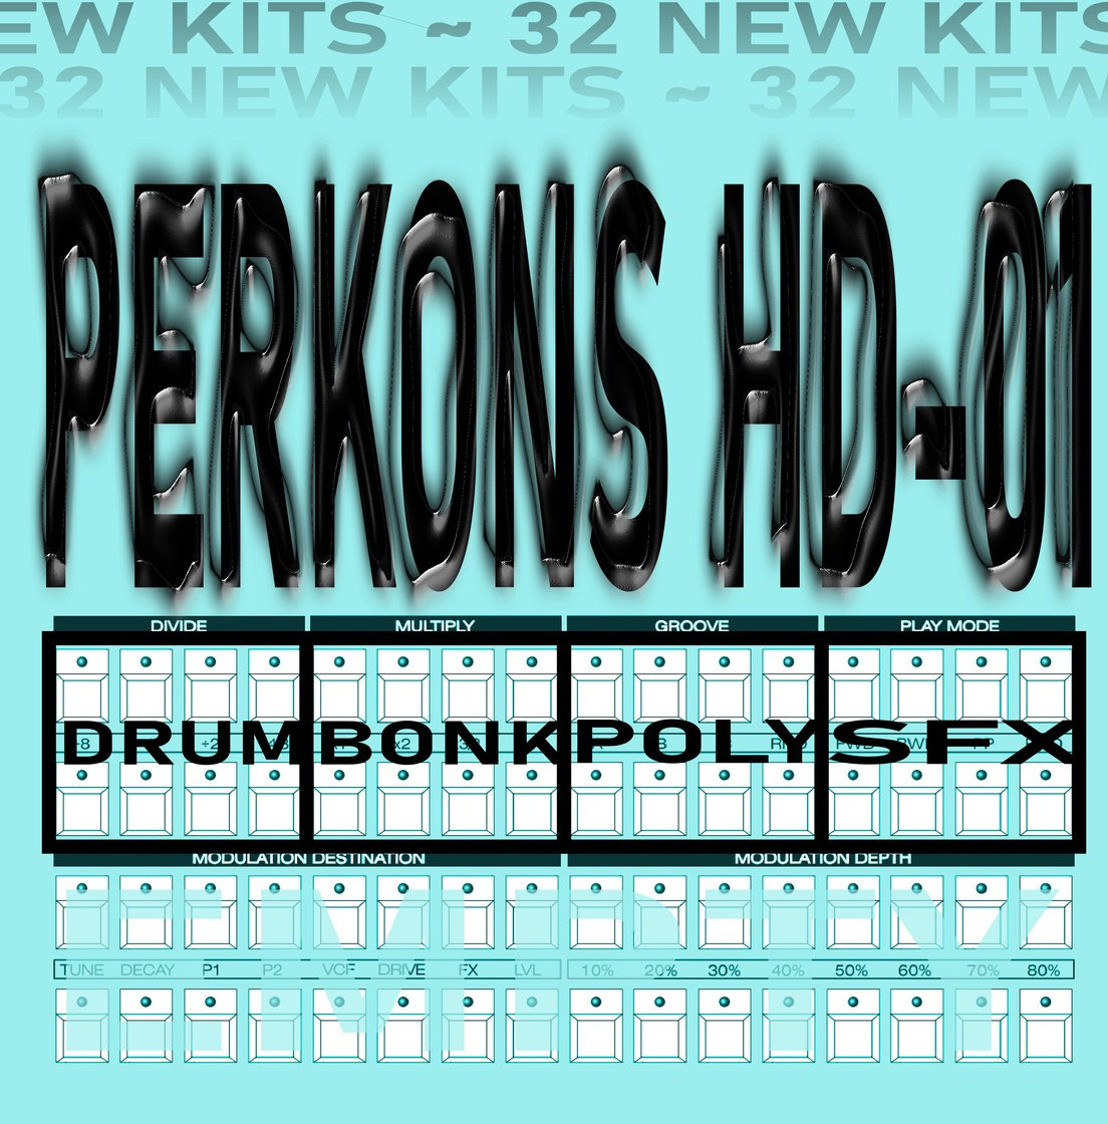 Erica Synths Launches Pērkons Kit Pack 1, With 32 Kits Crafted by HRTL